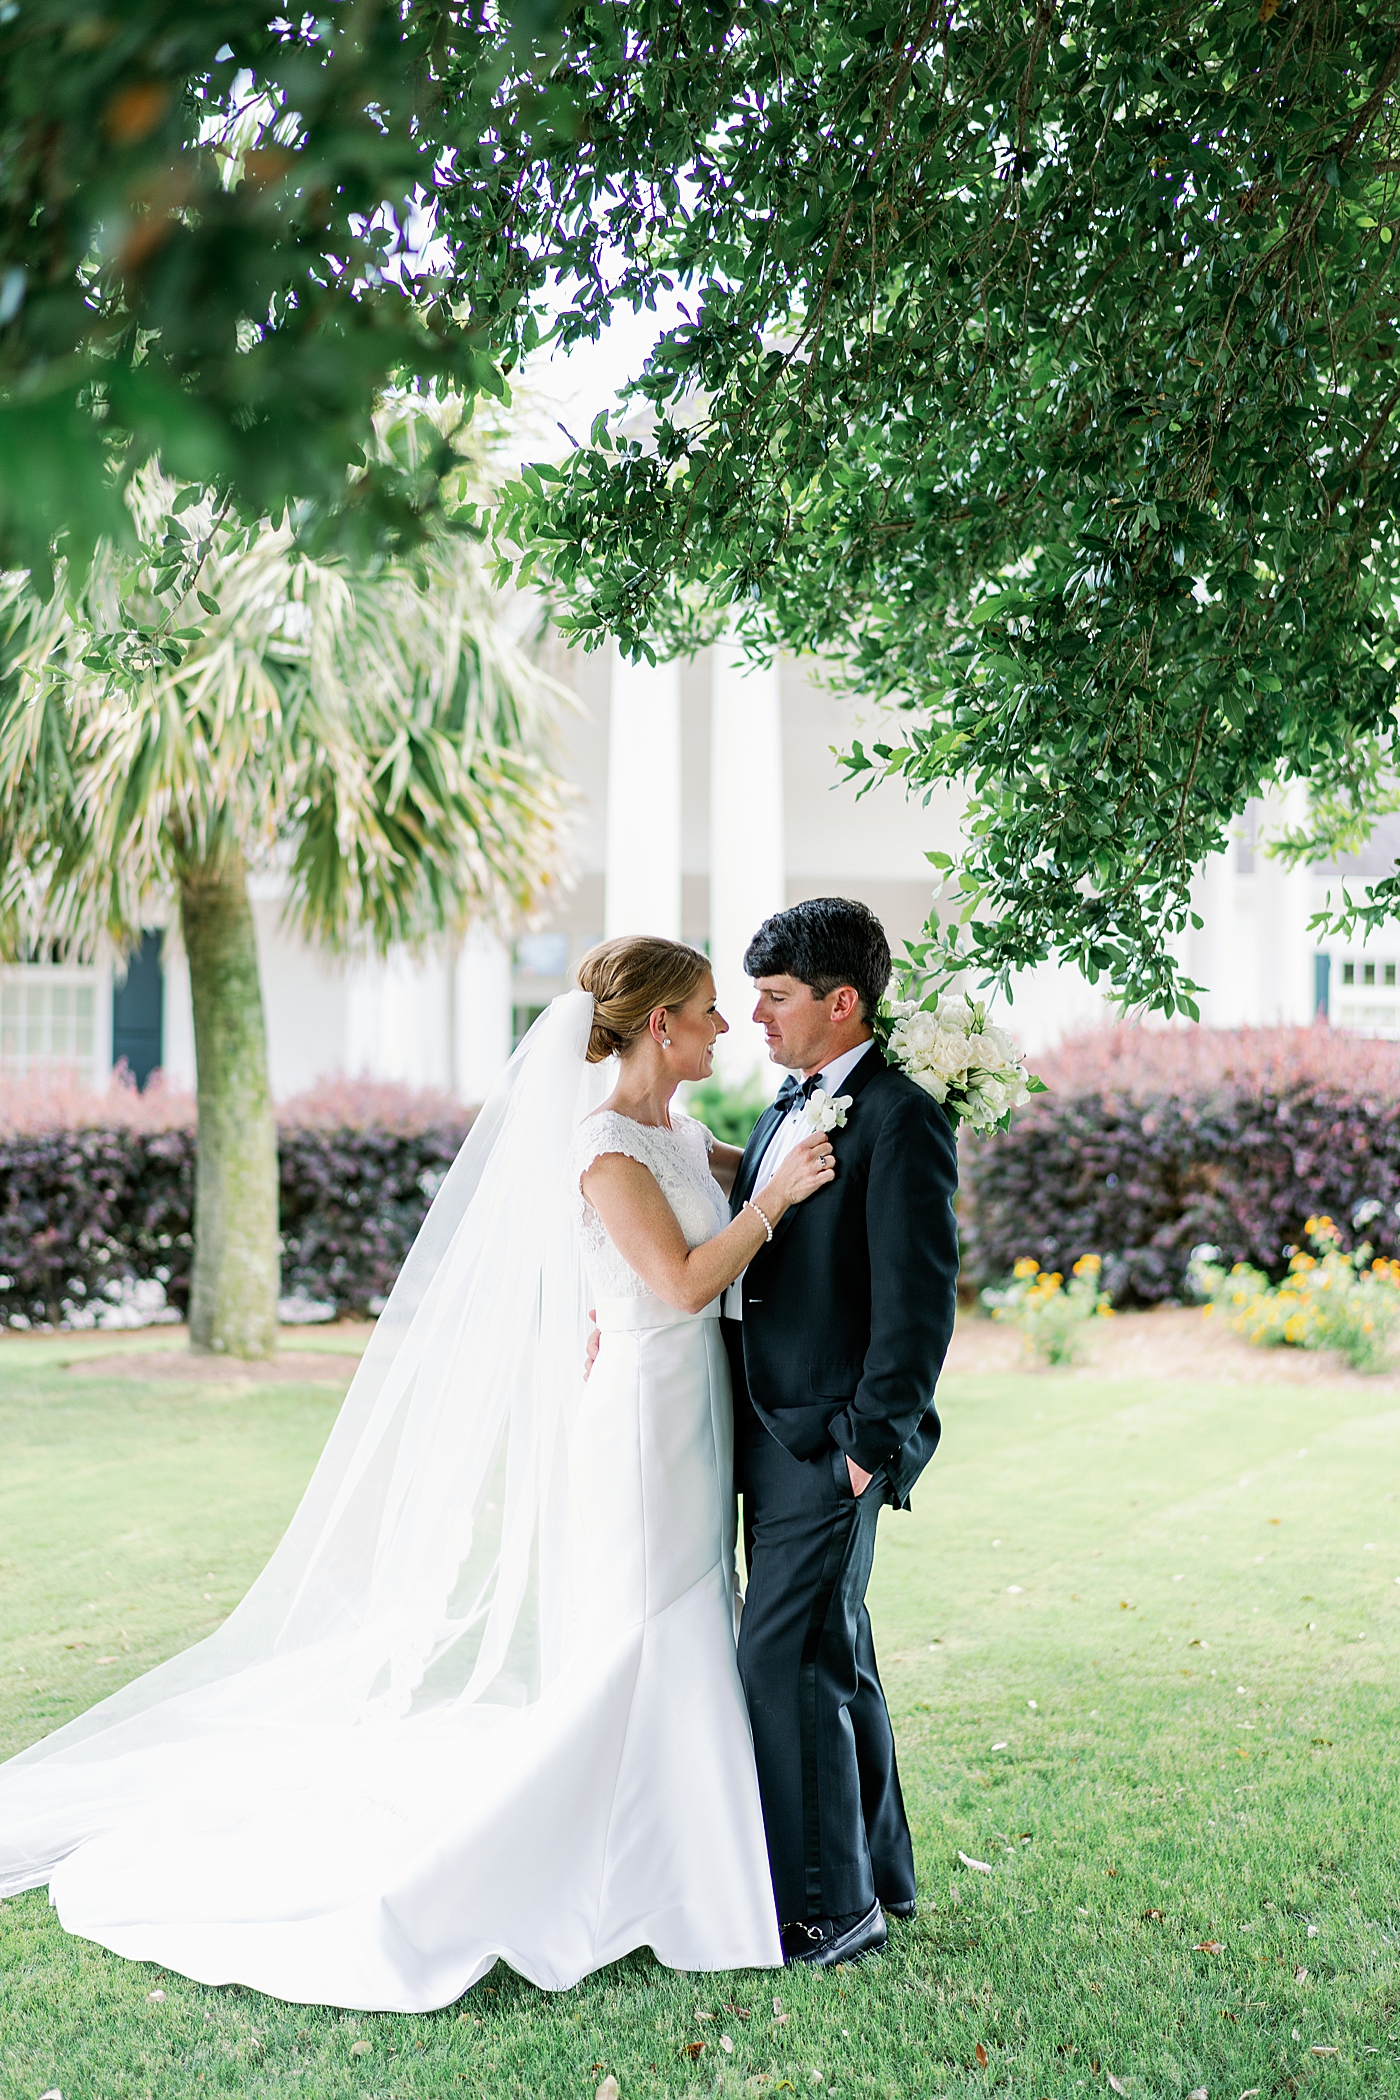 Bride and groom portraits | Image by Annie Laura Photo